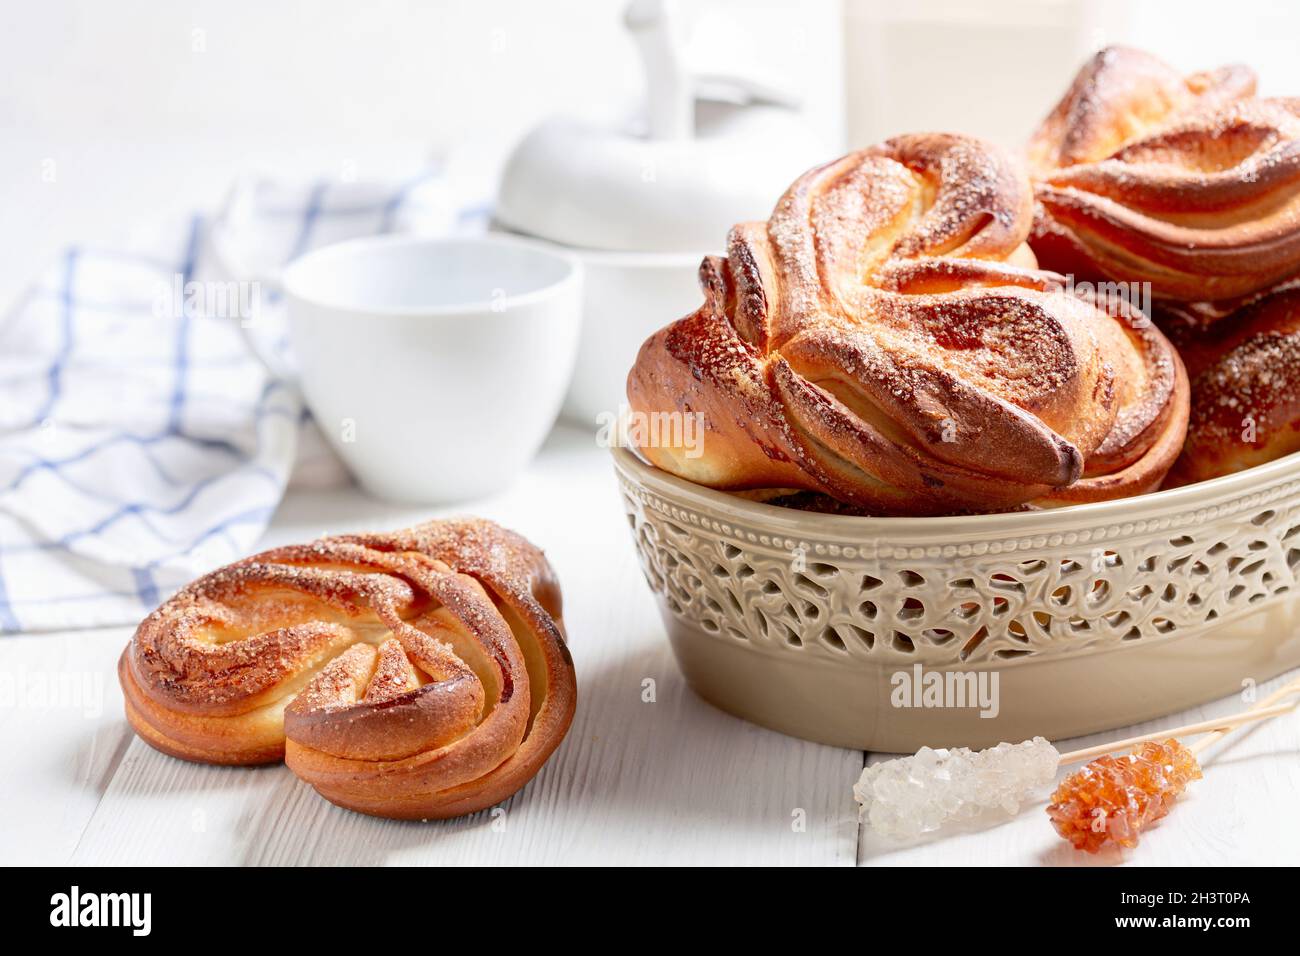 Swirling buns sprinkled with sugar. Stock Photo